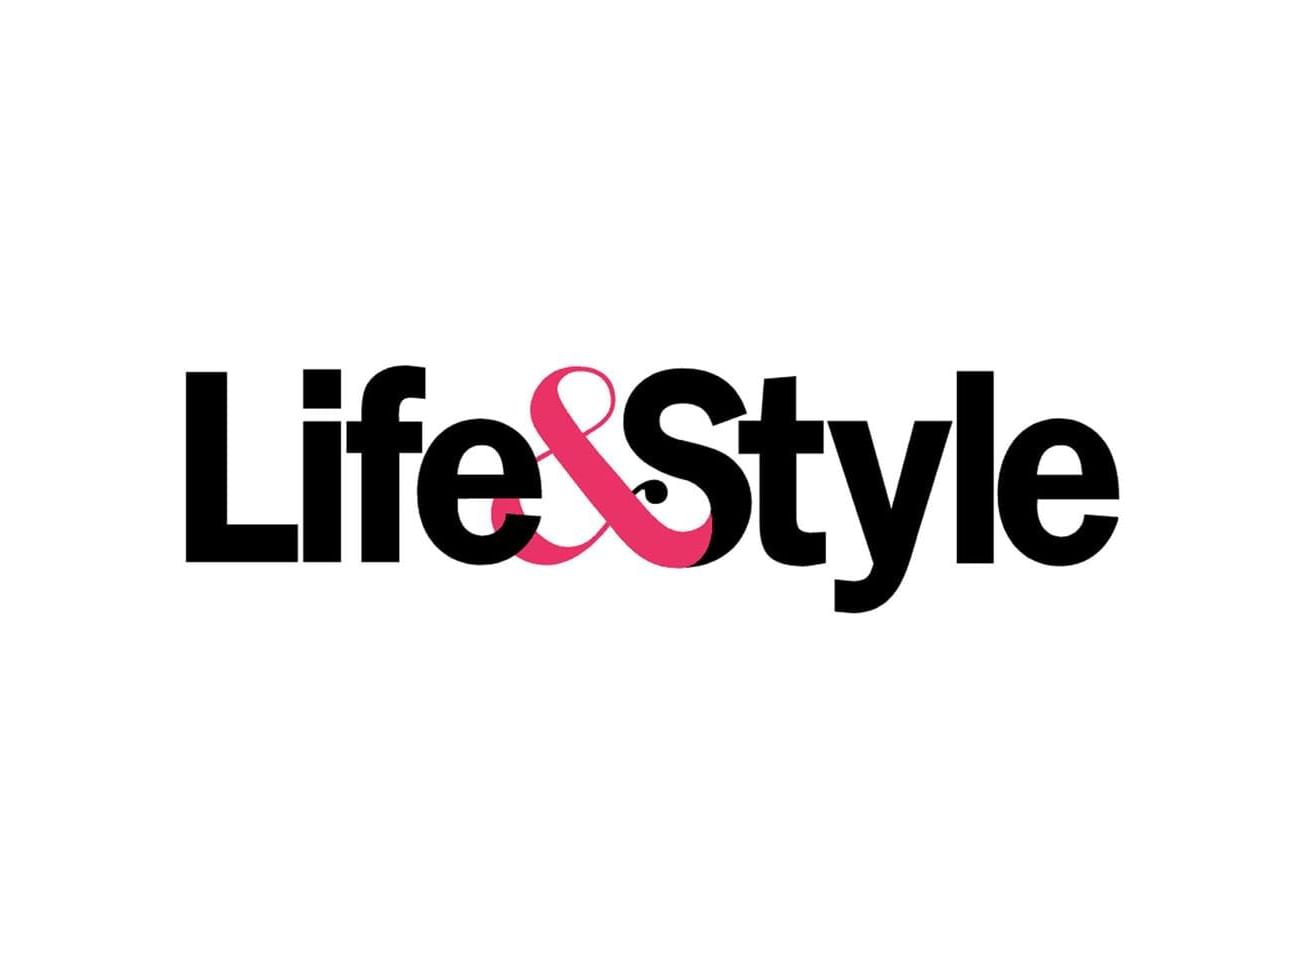 Life&Style logo at Gansevoort Meatpacking NYC